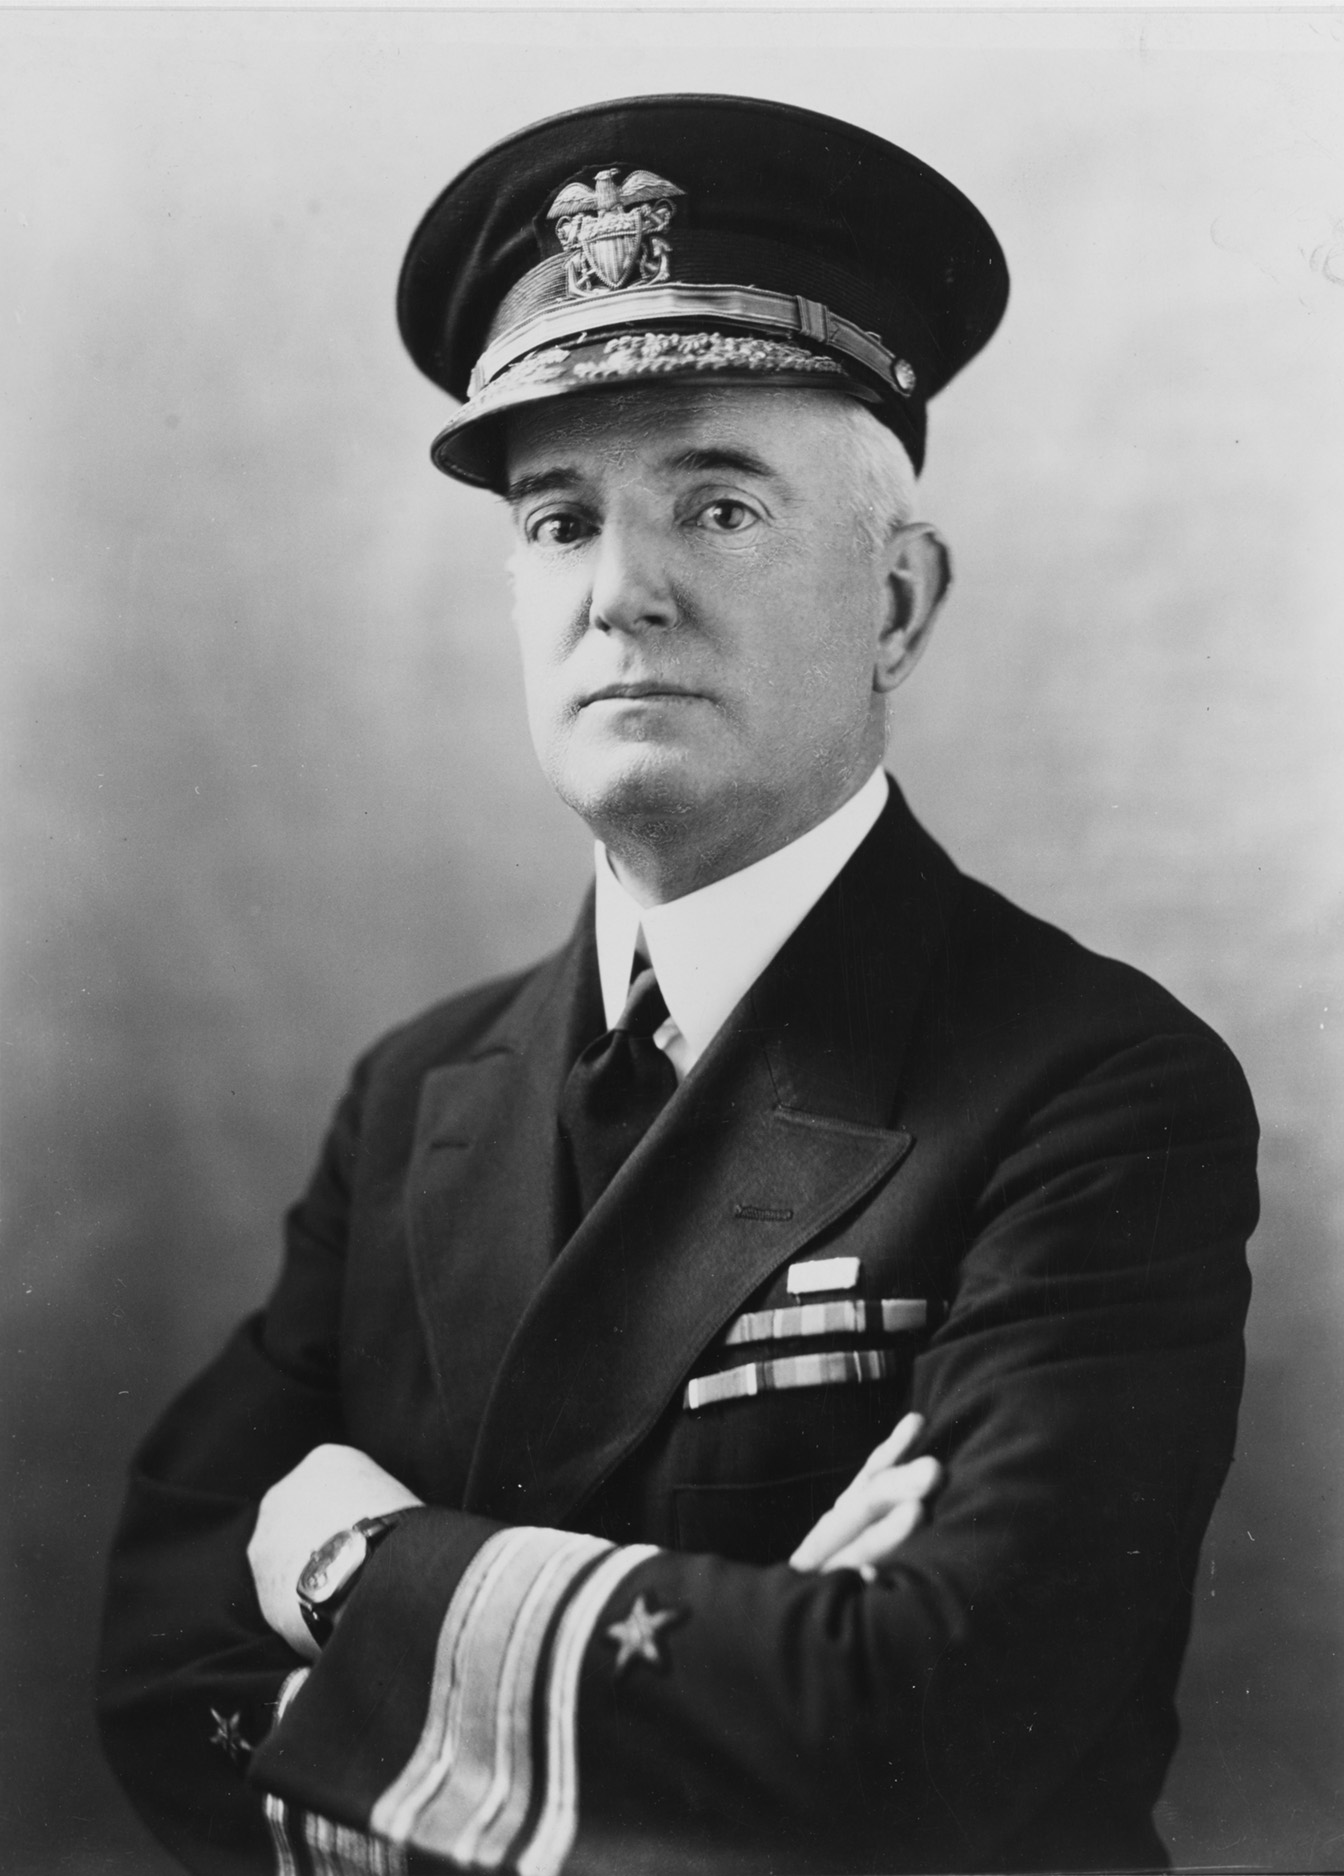 A headshot of Rear Admiral William A. Moffett wearing his dark, formal Navy uniform and admirals hat with his arms crossed.